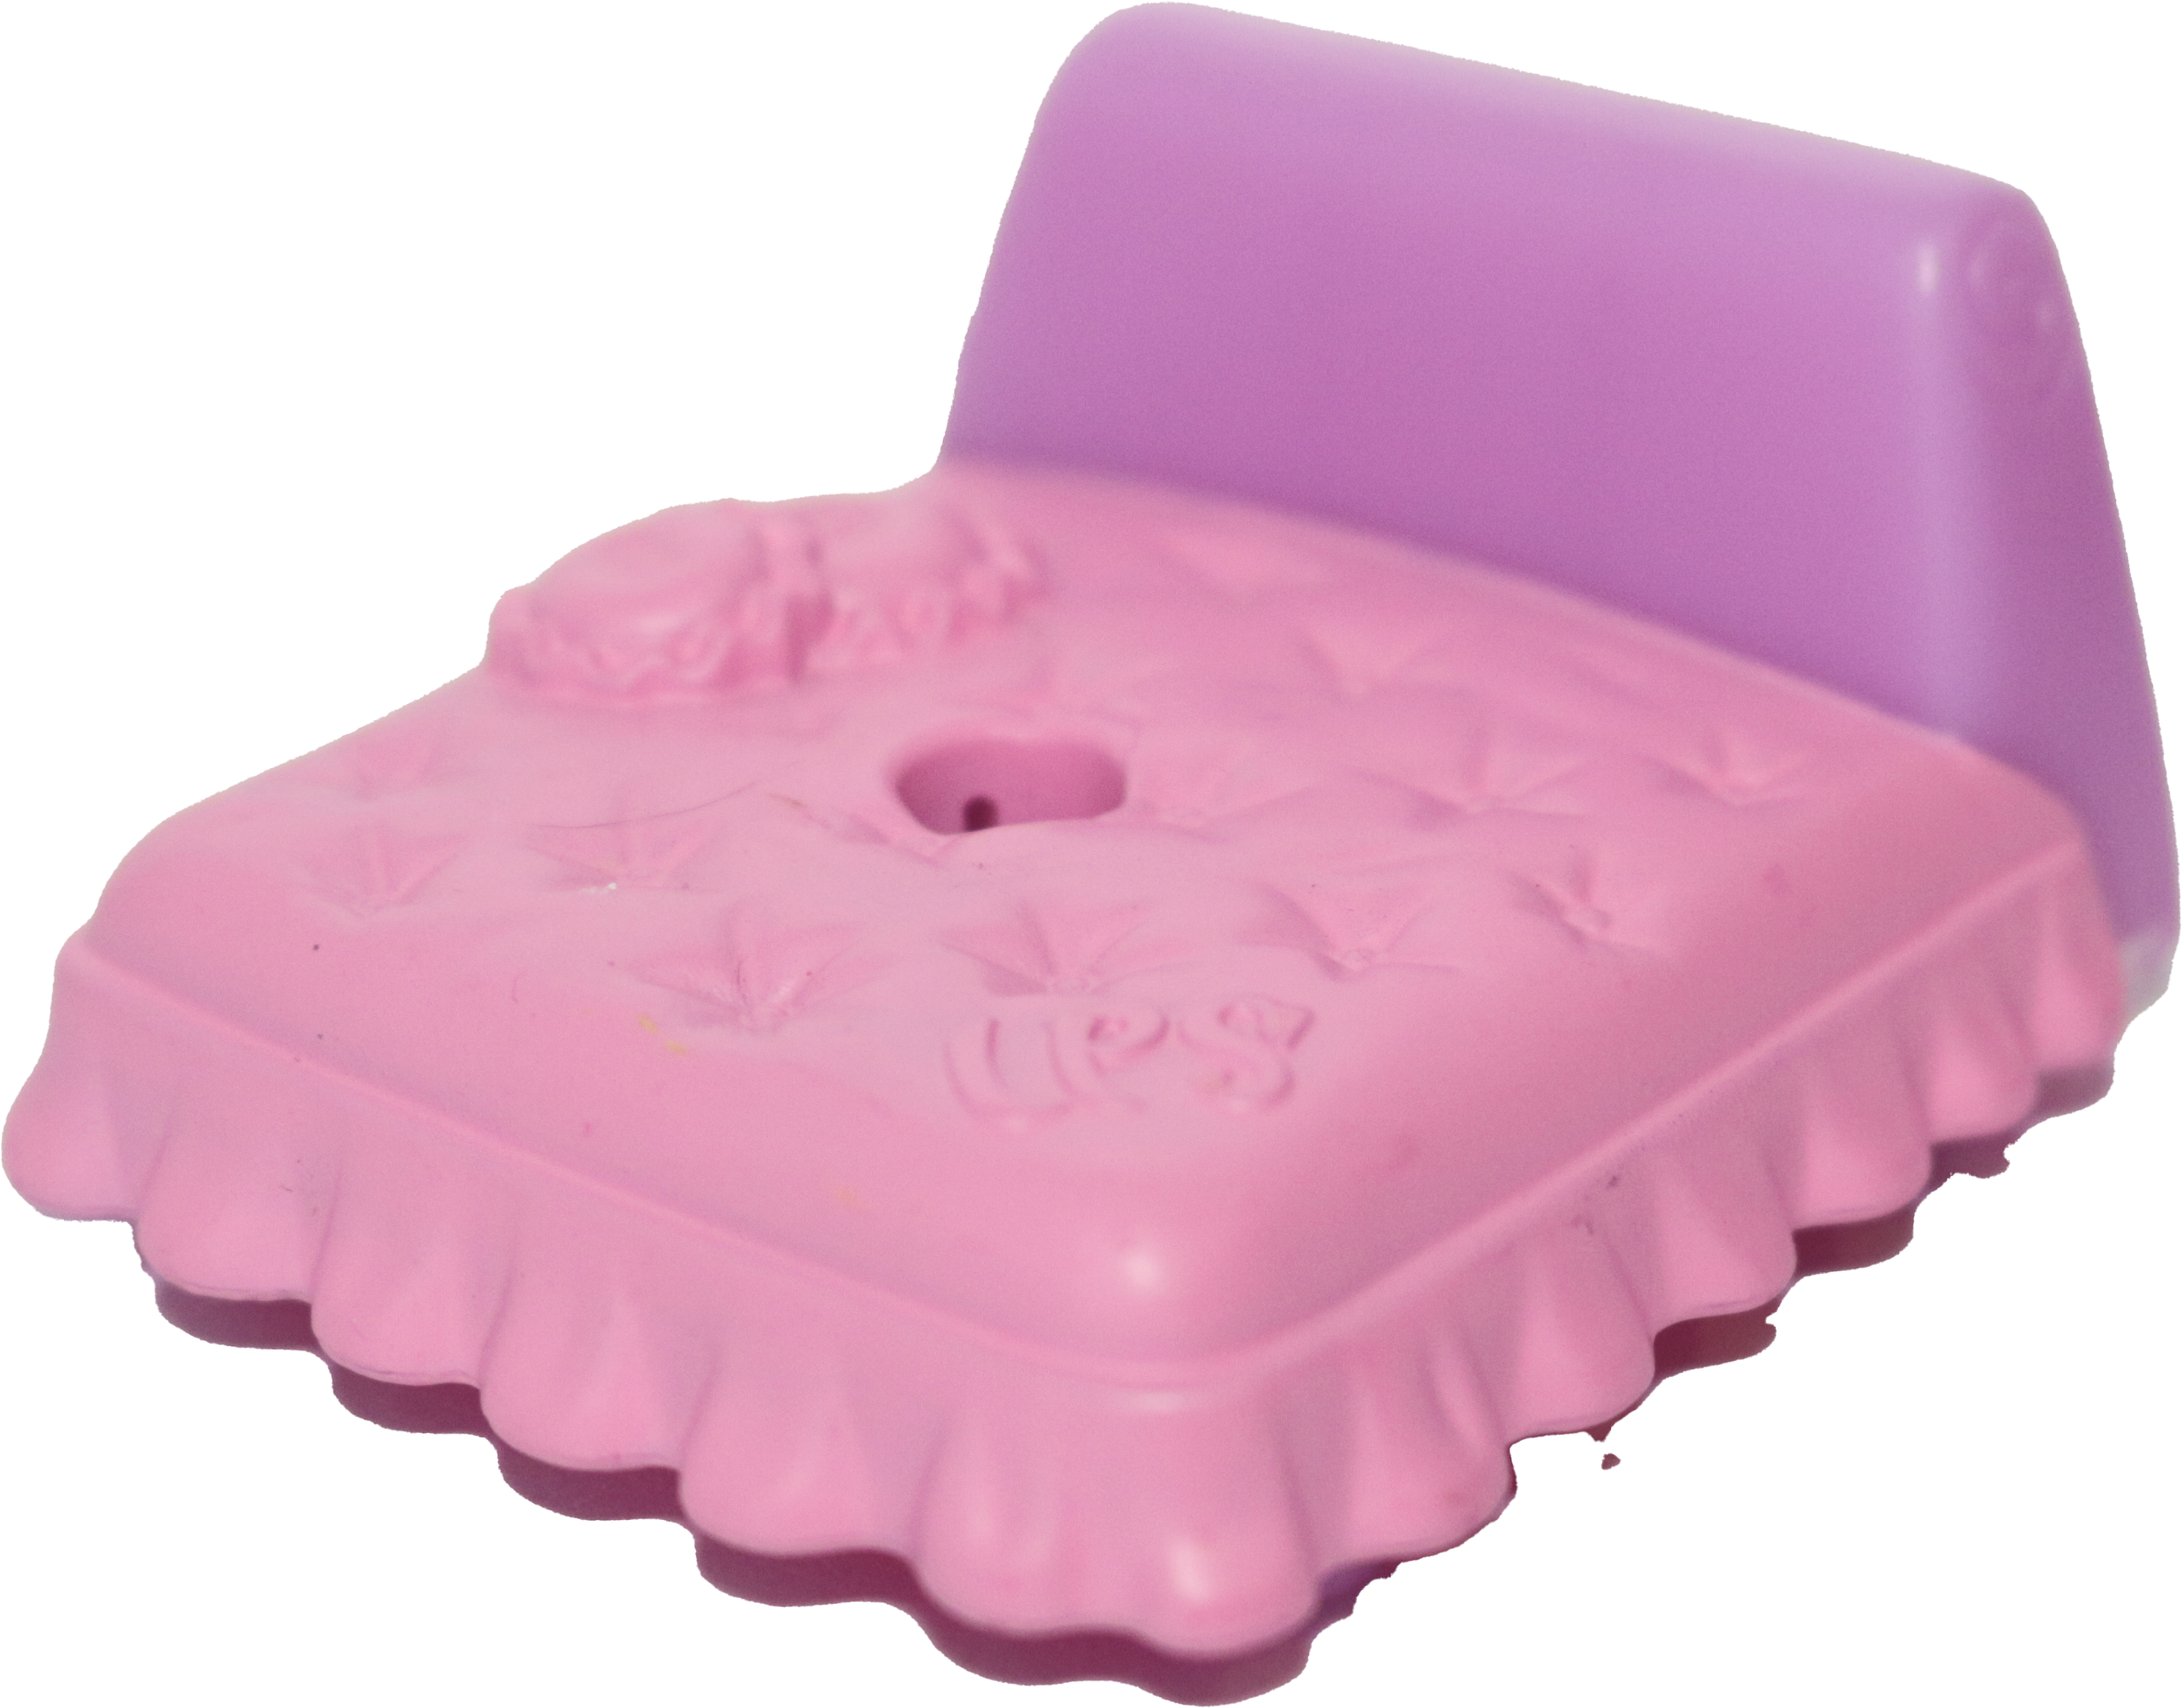 McDonald's Wave 2 Base -Frilly Bed